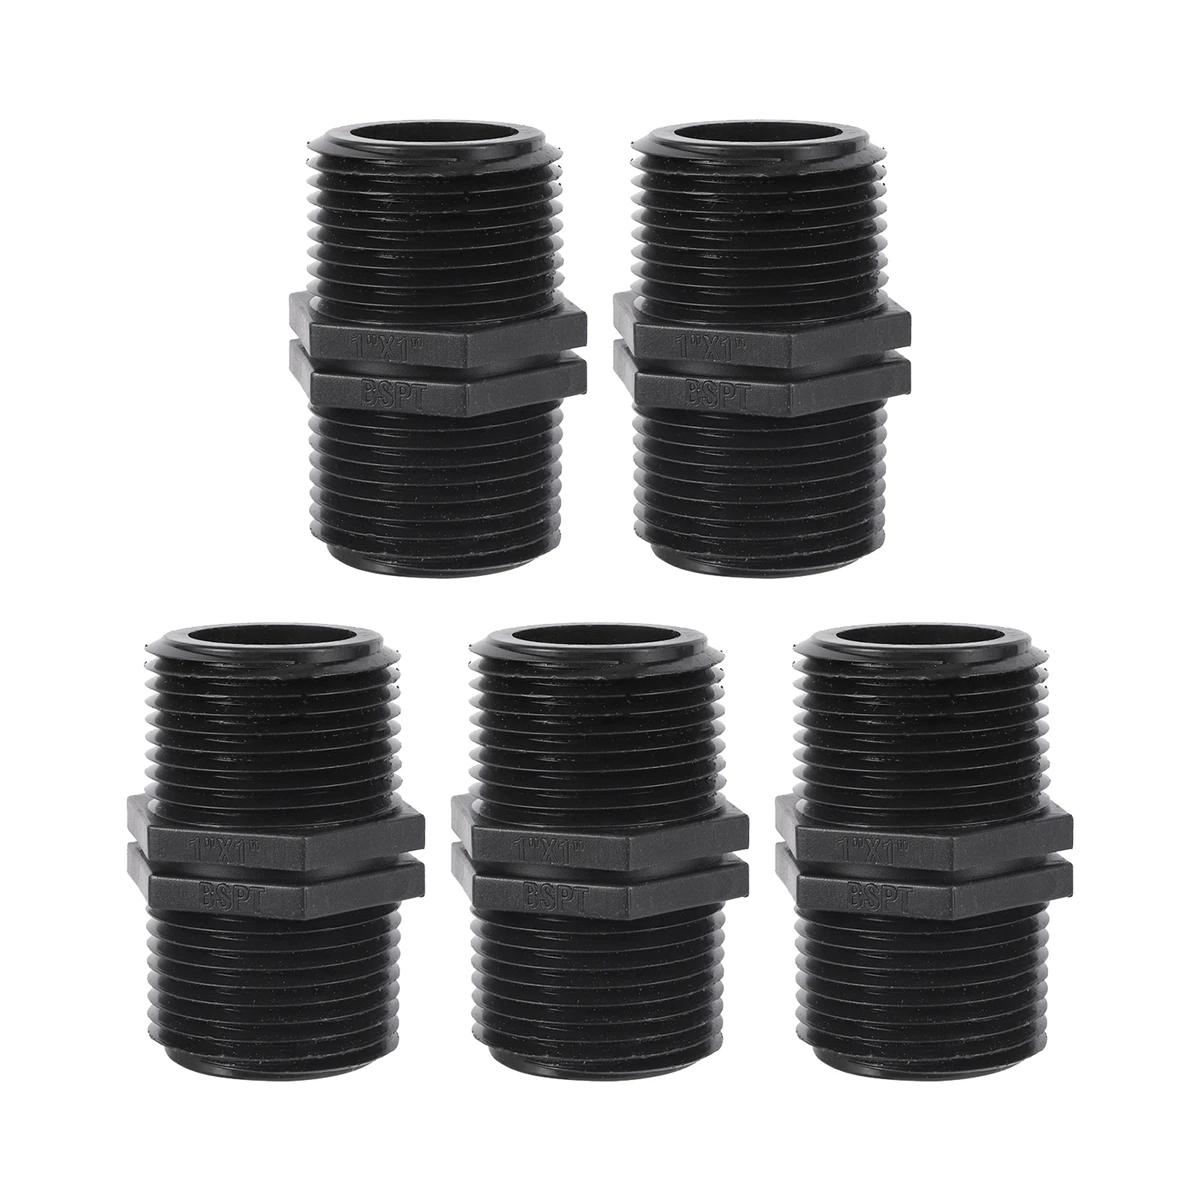 

1/2" 3/4" 1" 1.5" 2" 2.5" BSP Male Thread Equal Black Adapter Home Water Tank Fish Tank External Thread Connector Pipe Fittings